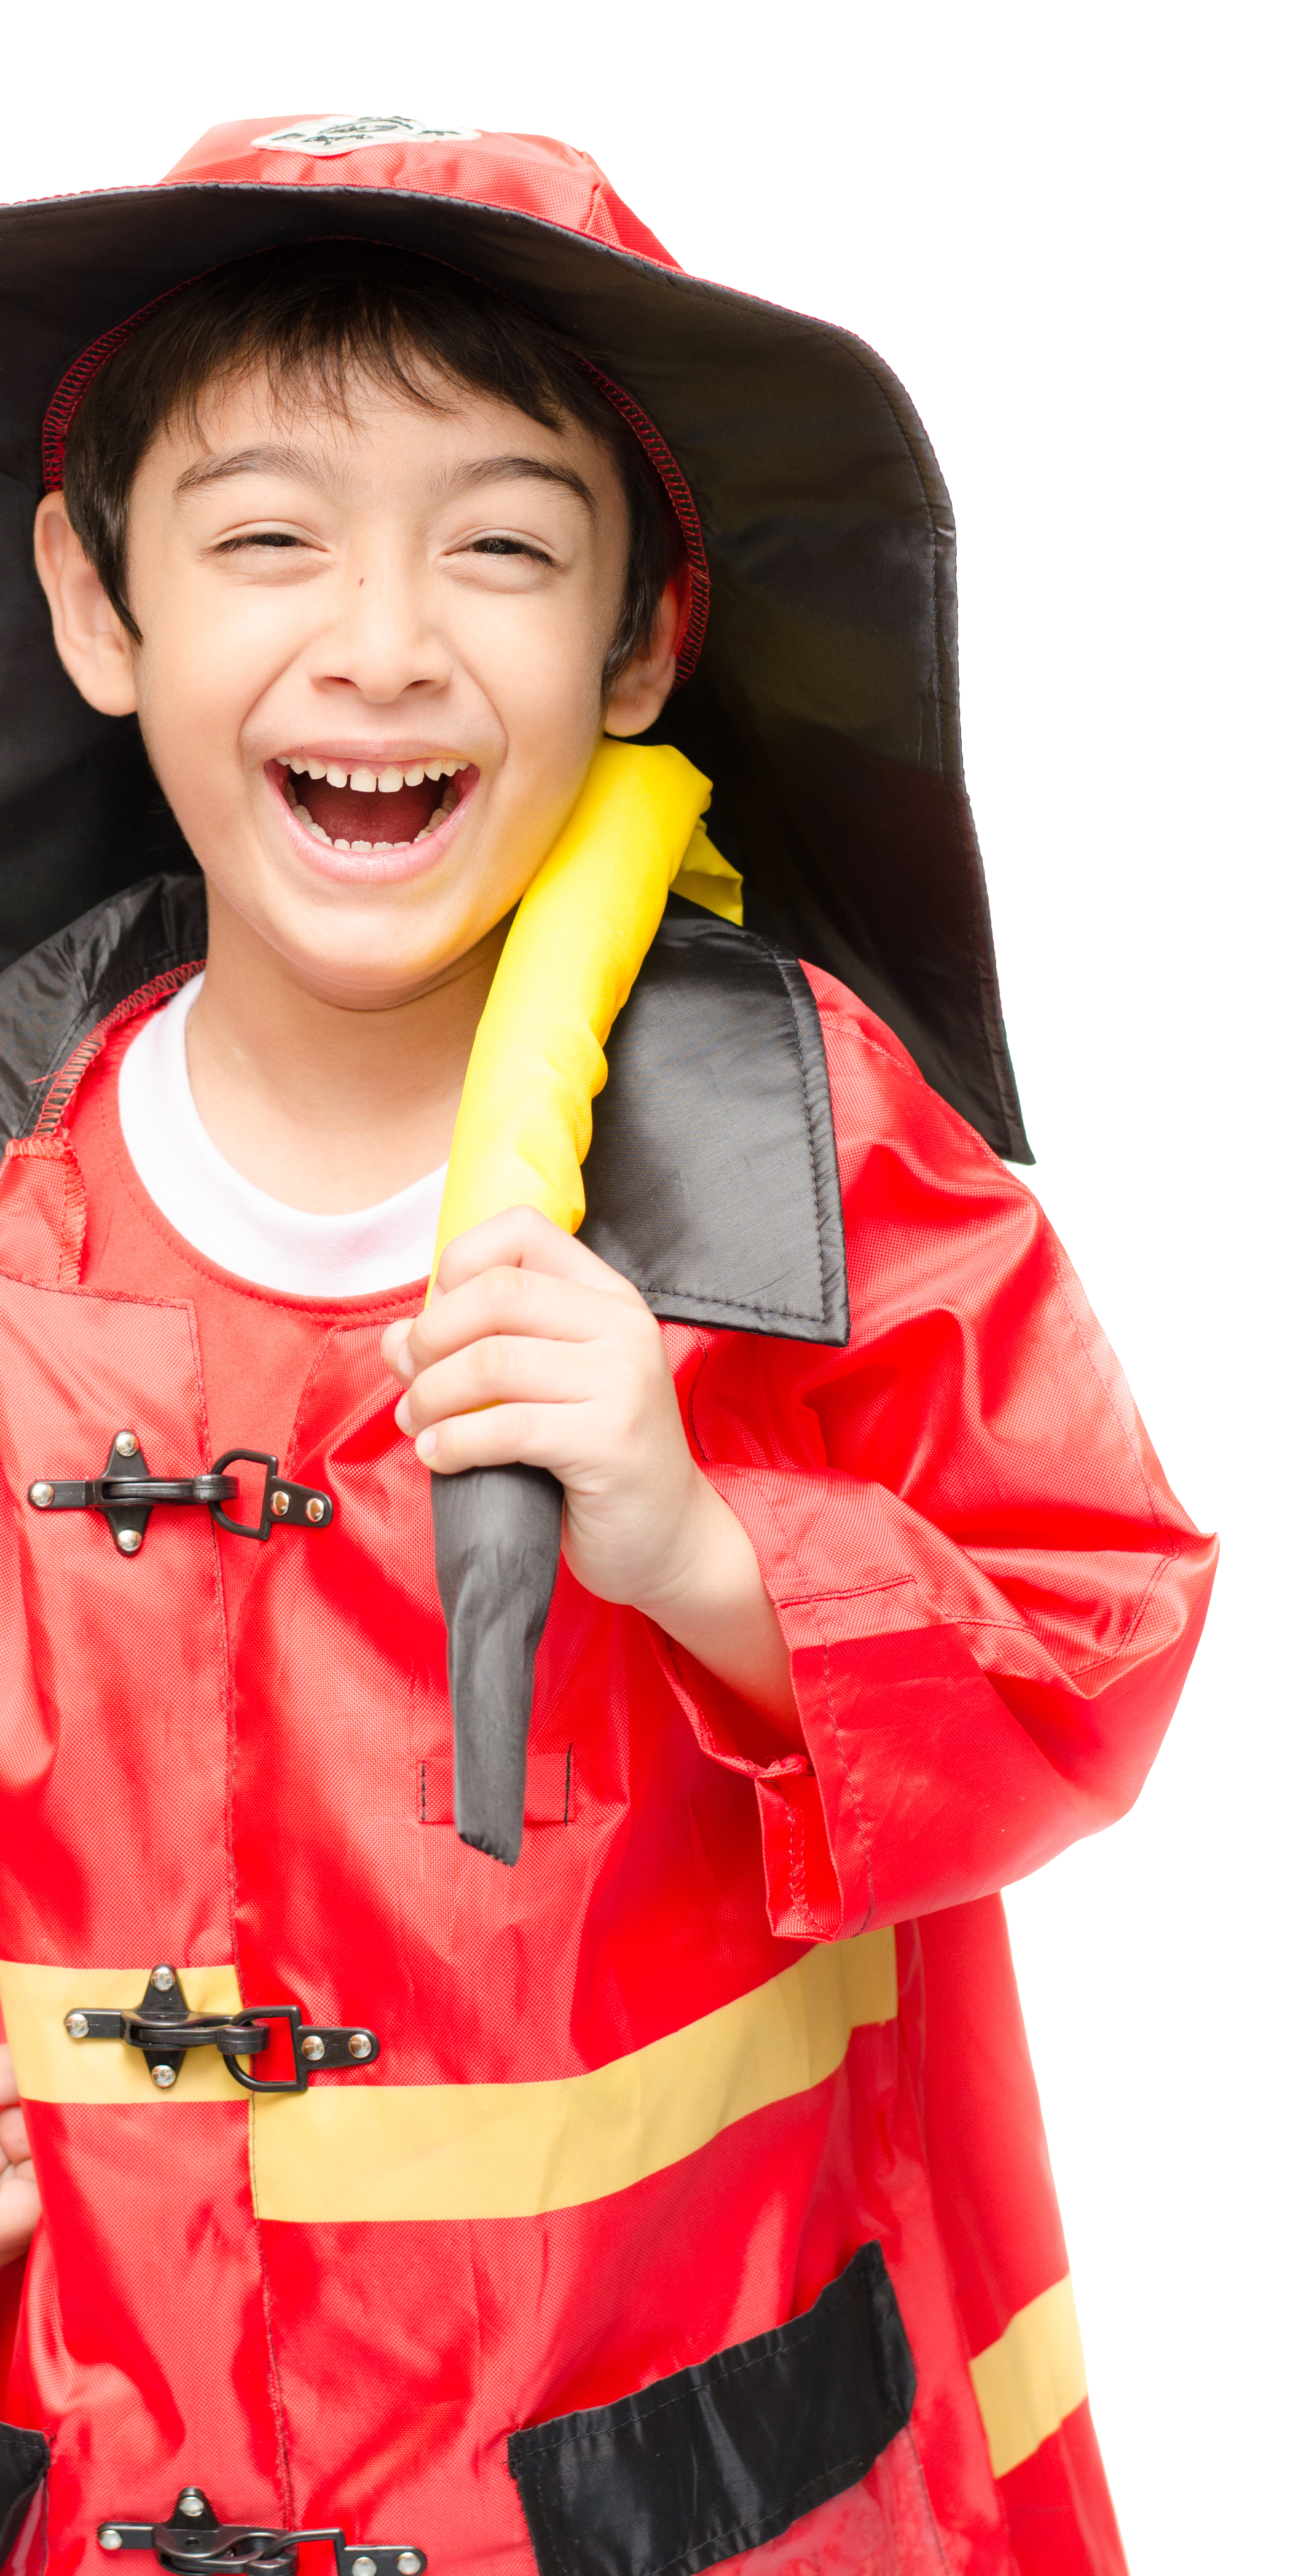 Young Asian boy wearing a firefighter costume, holding a hose over one shoulder, laughing at the camera.